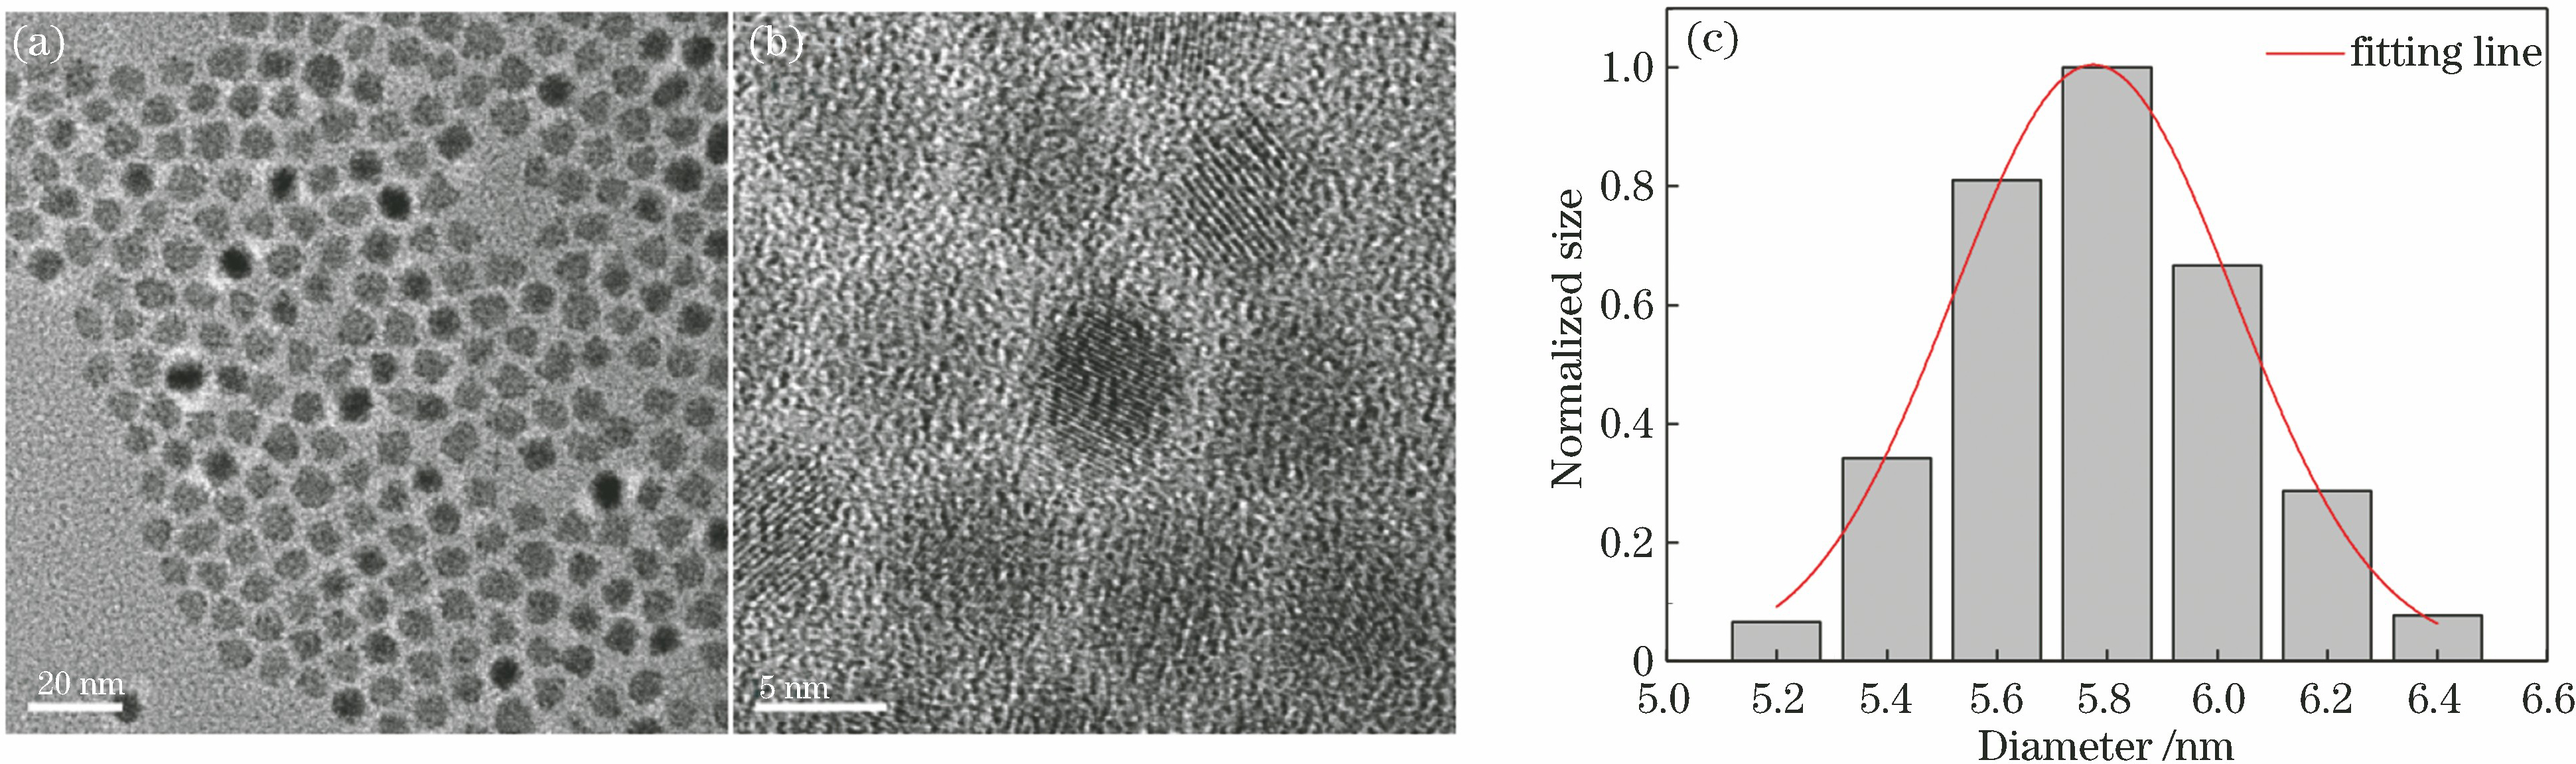 TEM images and size distribution of PbS QDs. (a) TEM image of PbS QDs (20 nm scale); (b) TEM image of PbS QDs (5 nm scale); (c) size distribution of PbS QDs